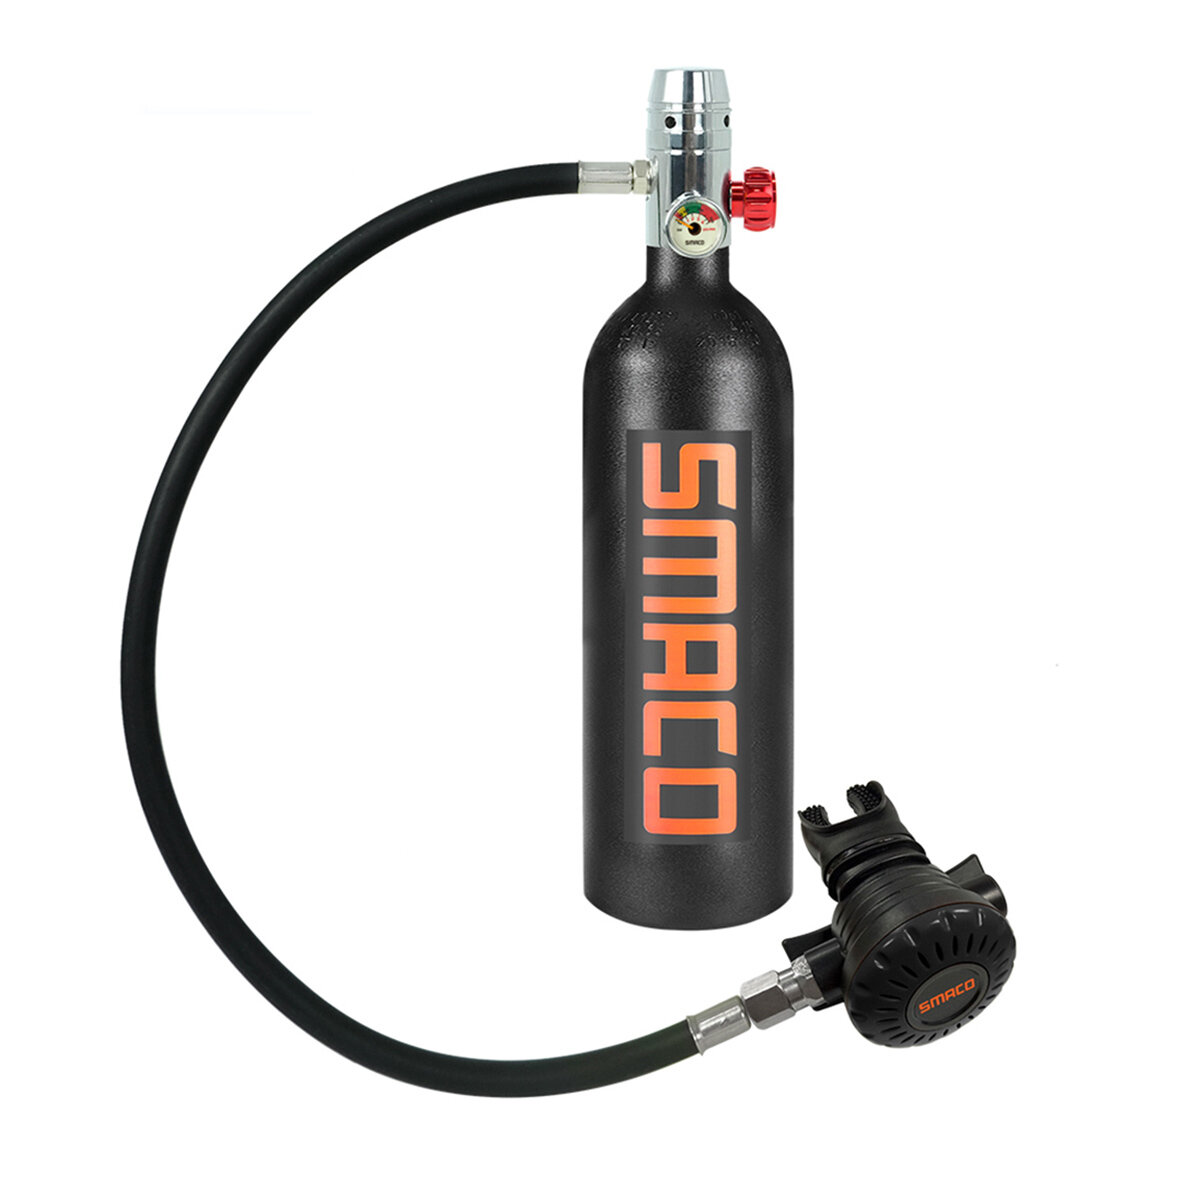 

SMACO S400 1L Mini Diving Scuba Air Tank Underwater Breath Oxygen Tank with Diving Respirator Outdoor Water Sport